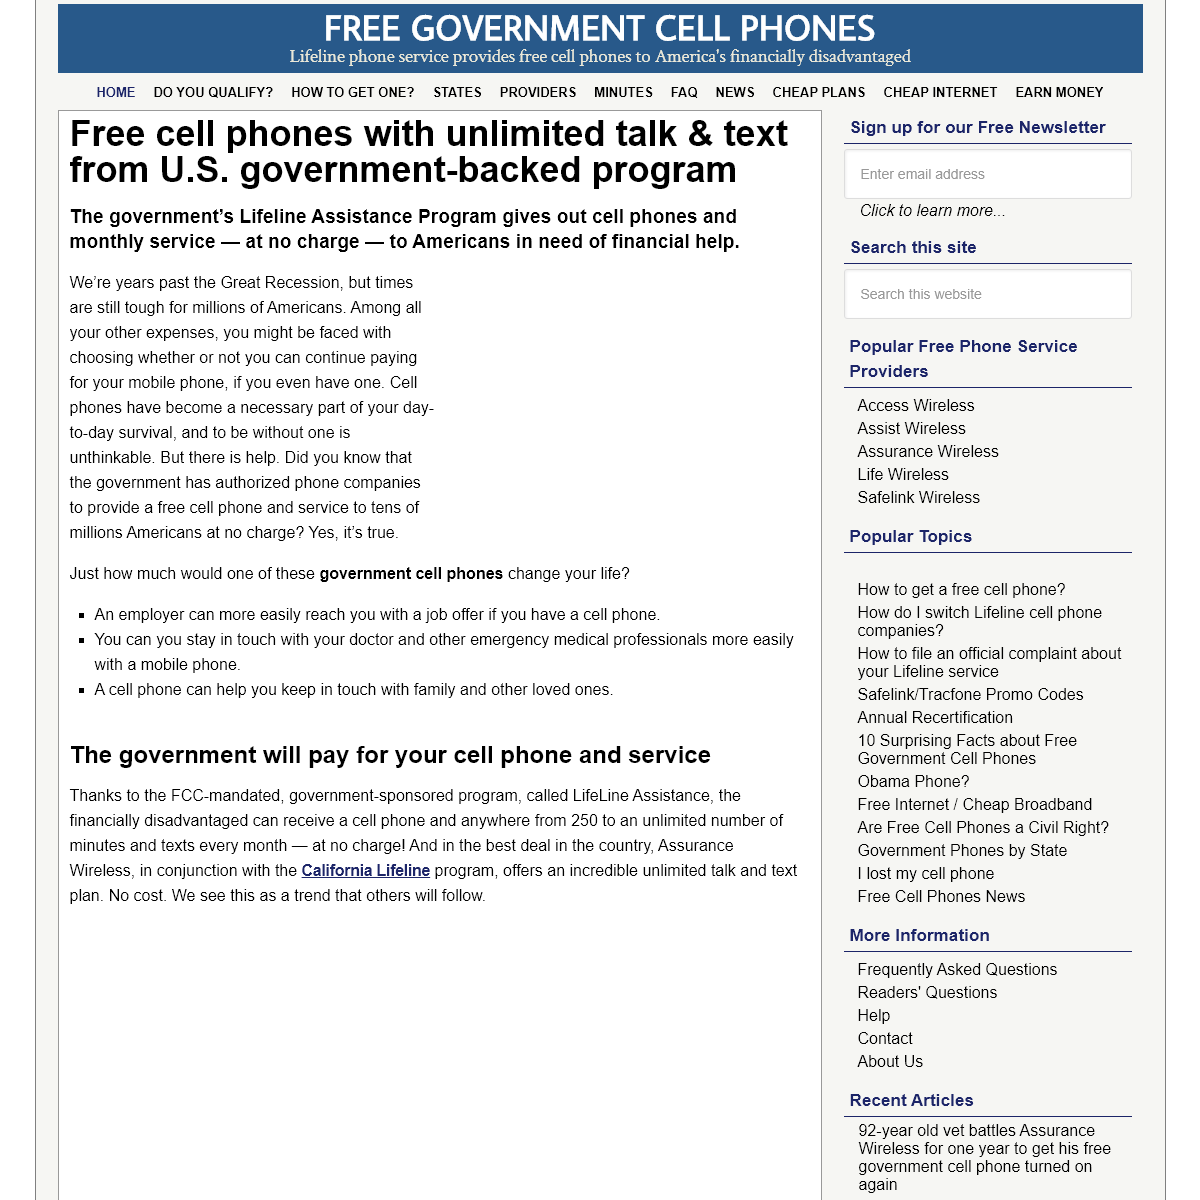 Free Cell Phones, Unlimited Talk & Text from the Government